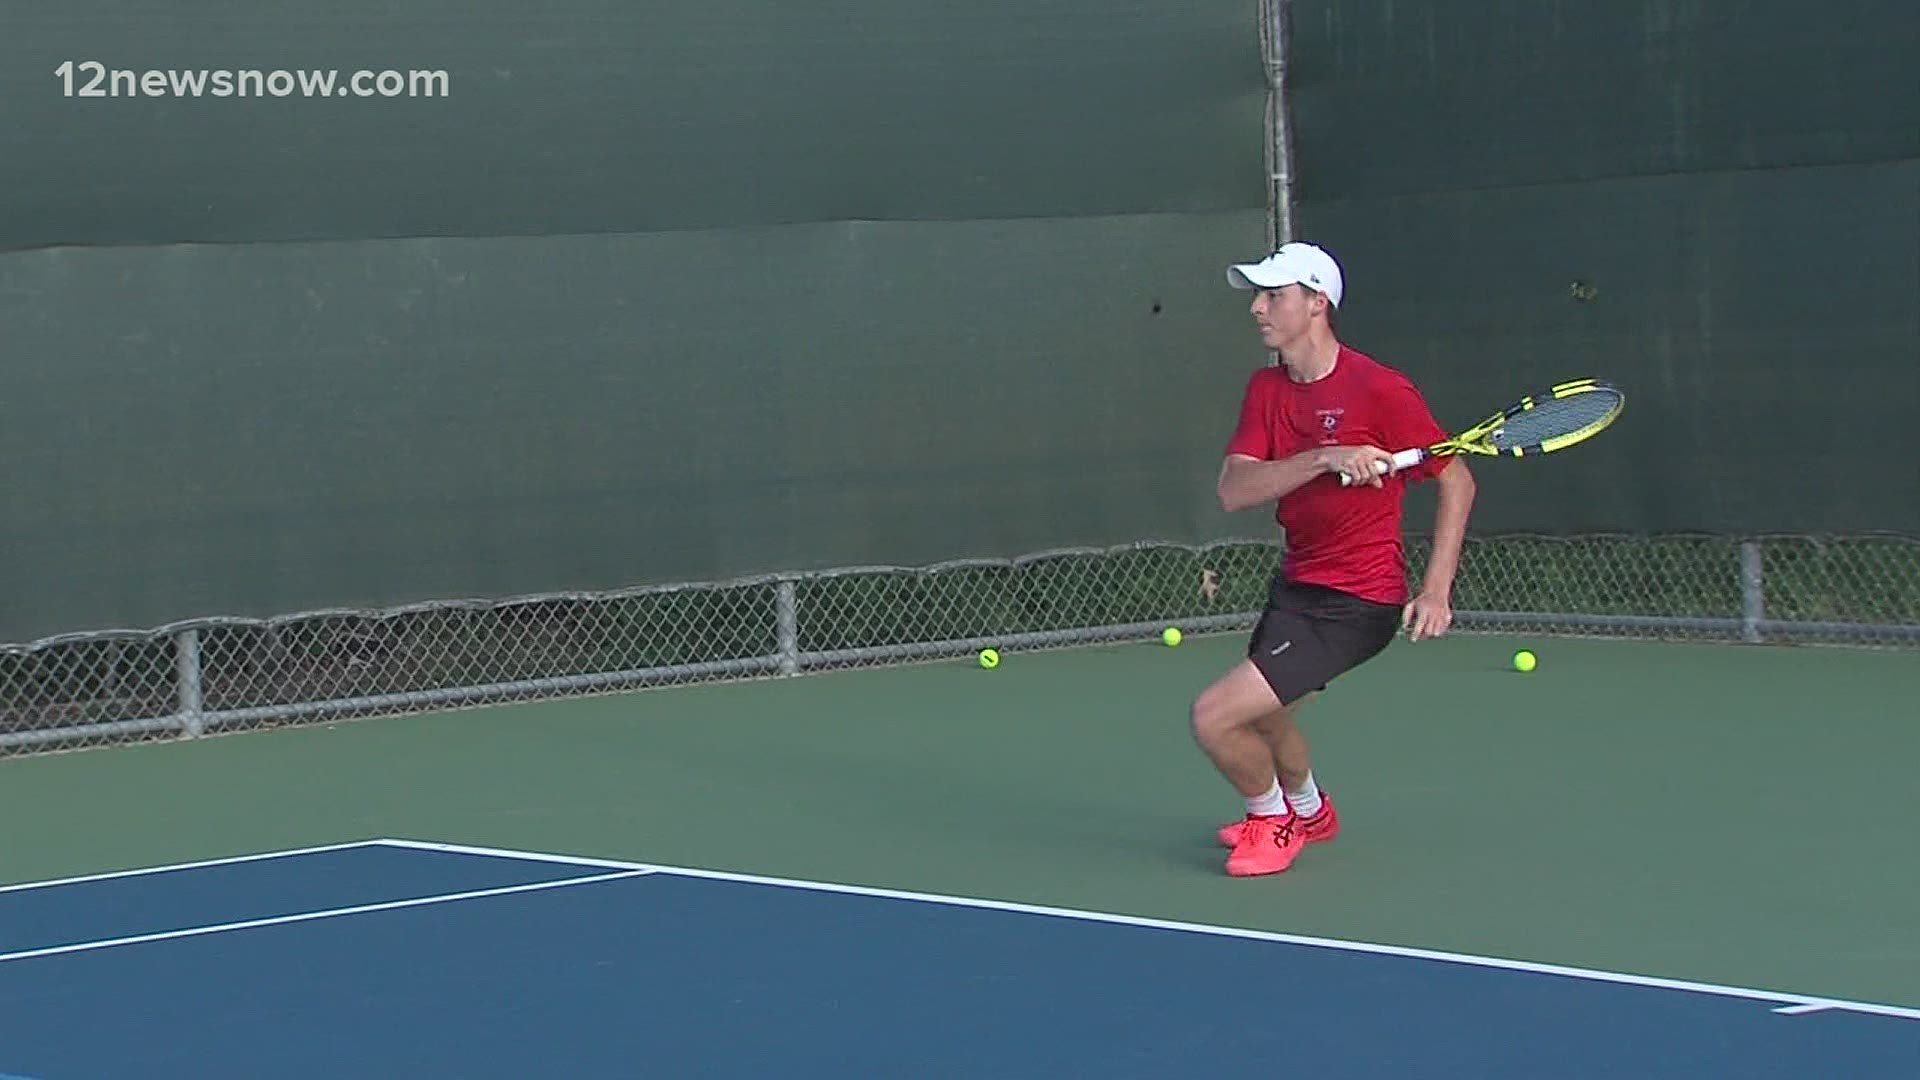 James Menard's unbelievable senior year continues with a UIL State Tennis Tournament appearance